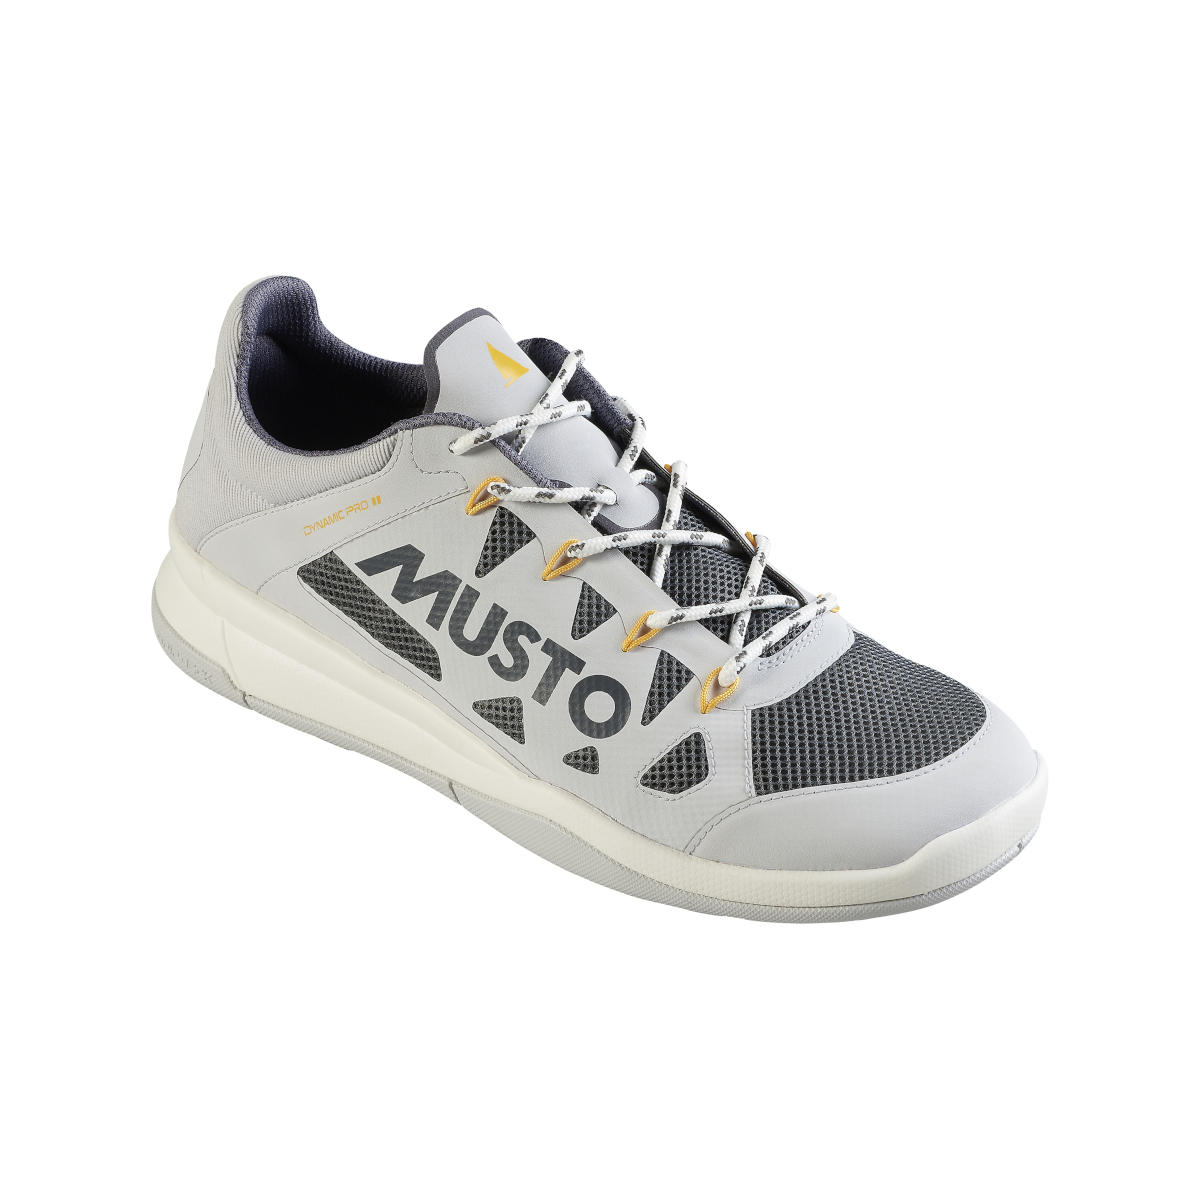 Musto Dynamic Pro II Adapt chaussures bateau homme gris clair / jaune, taille 46,5